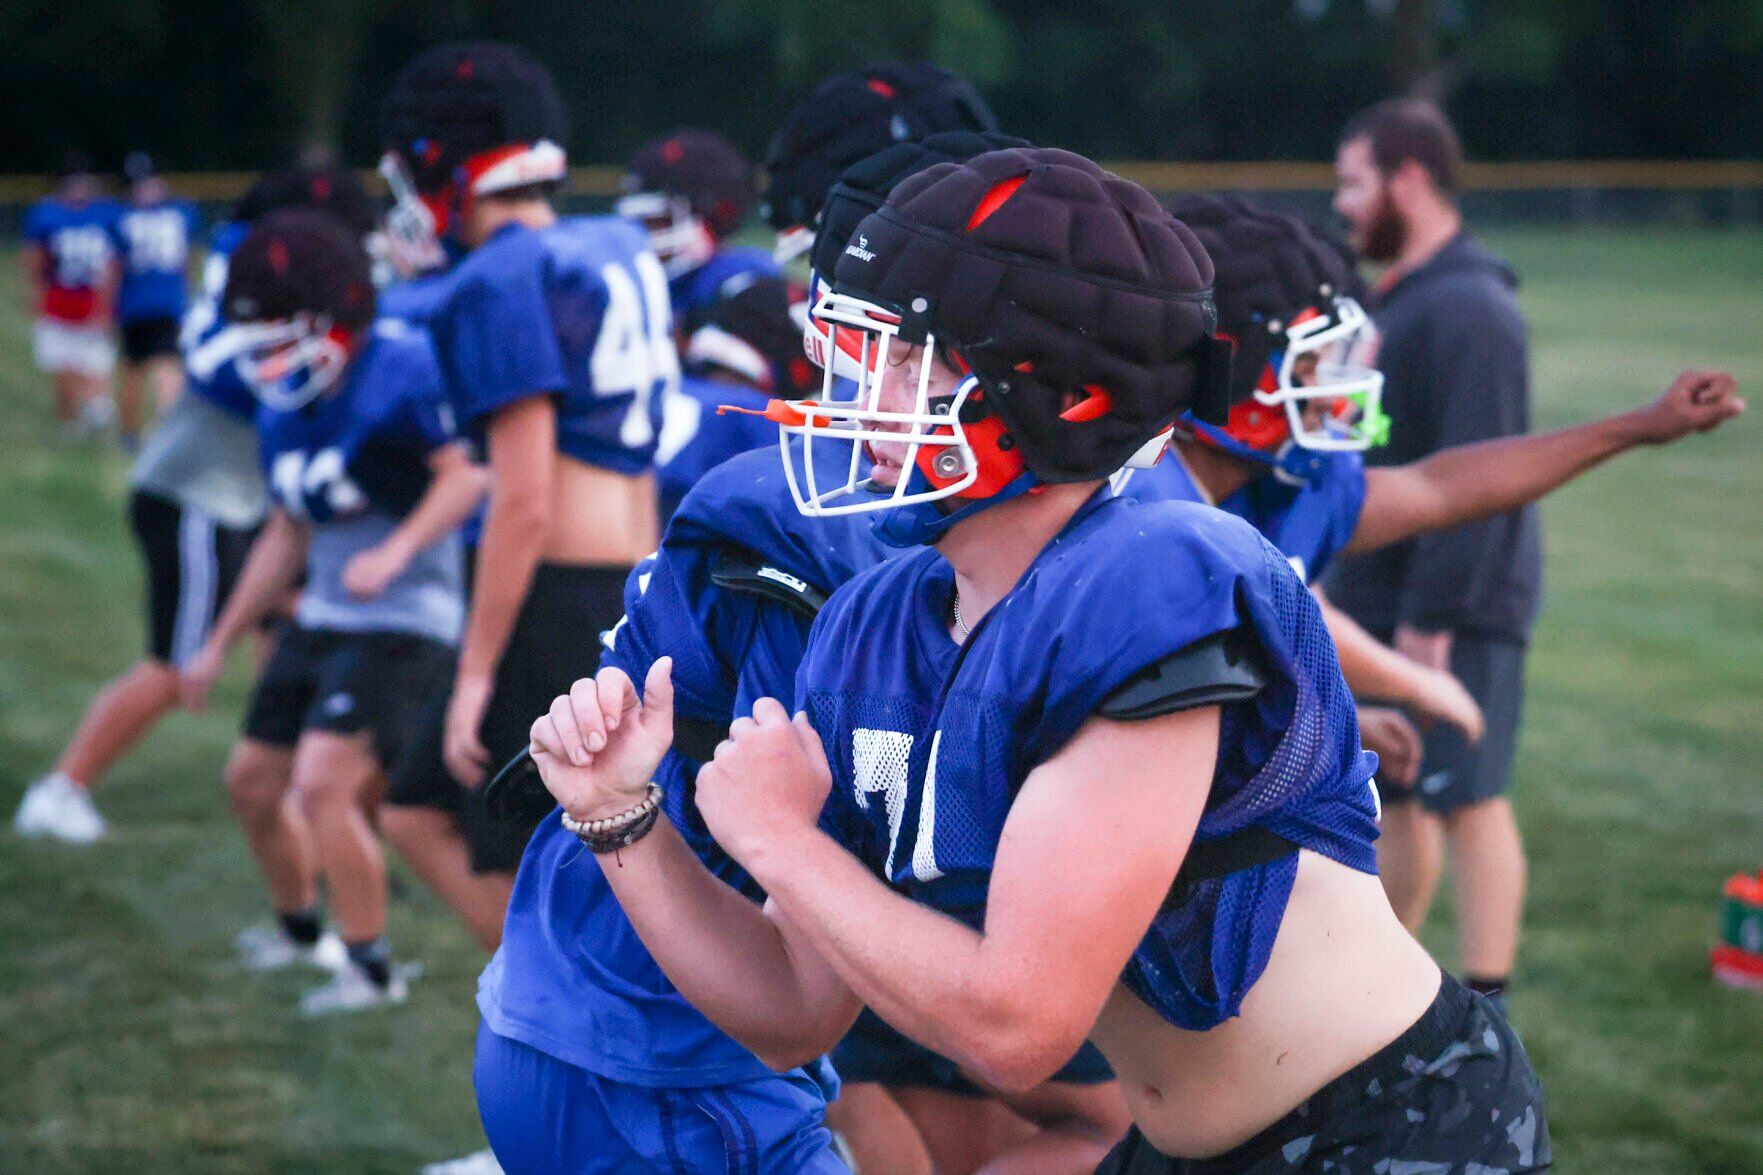 St. Teresa Football Team Prepares for New Season with New Coach, Schedule, and Players